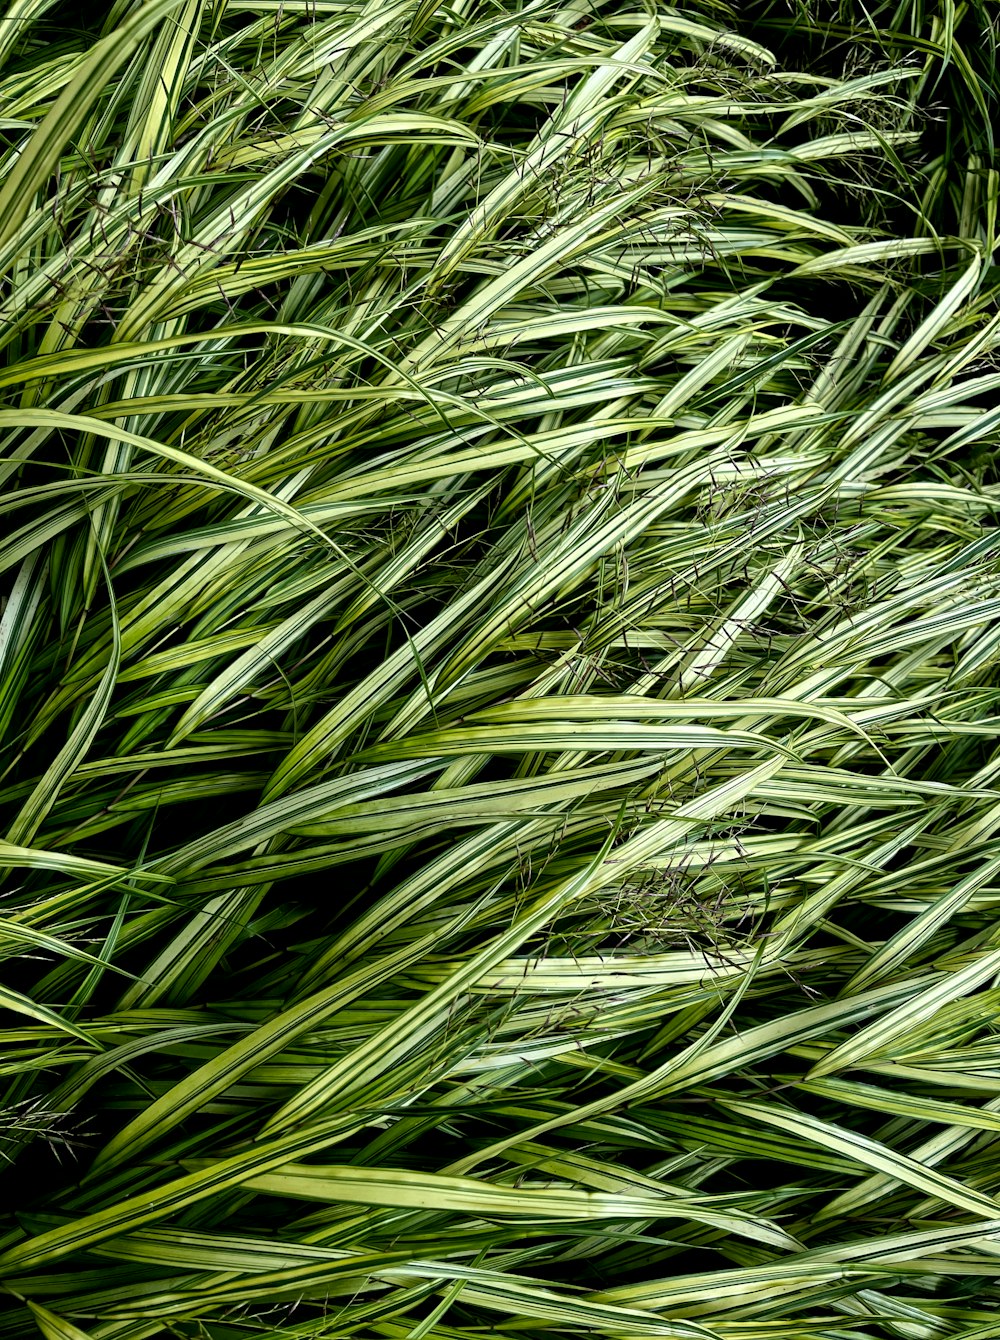 a close up of a grass plant with lots of green leaves